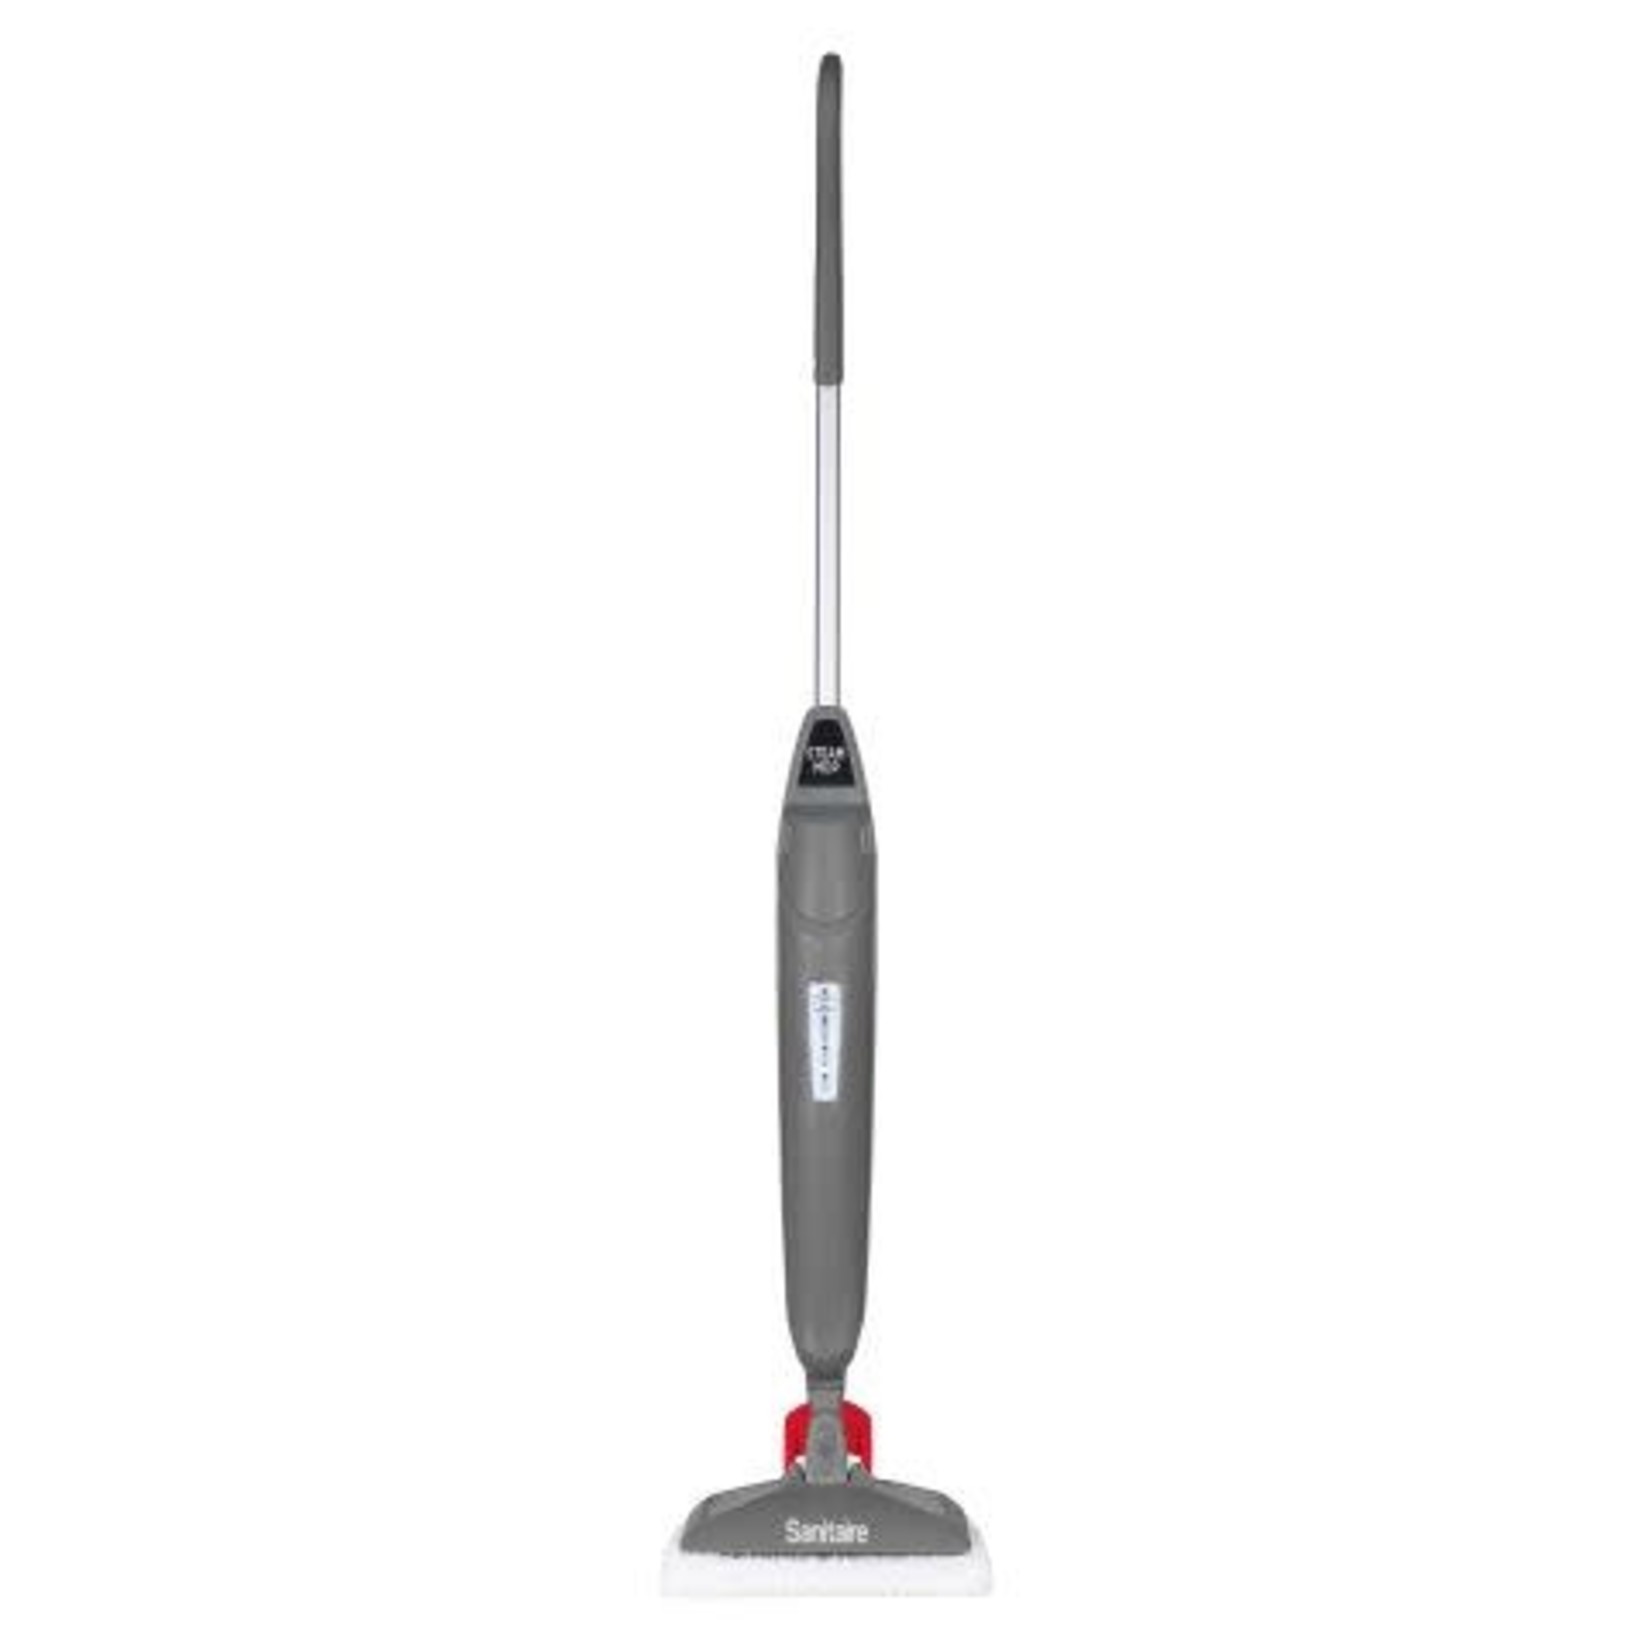 Sanitaire Sanitaire Commercial Steam Mop